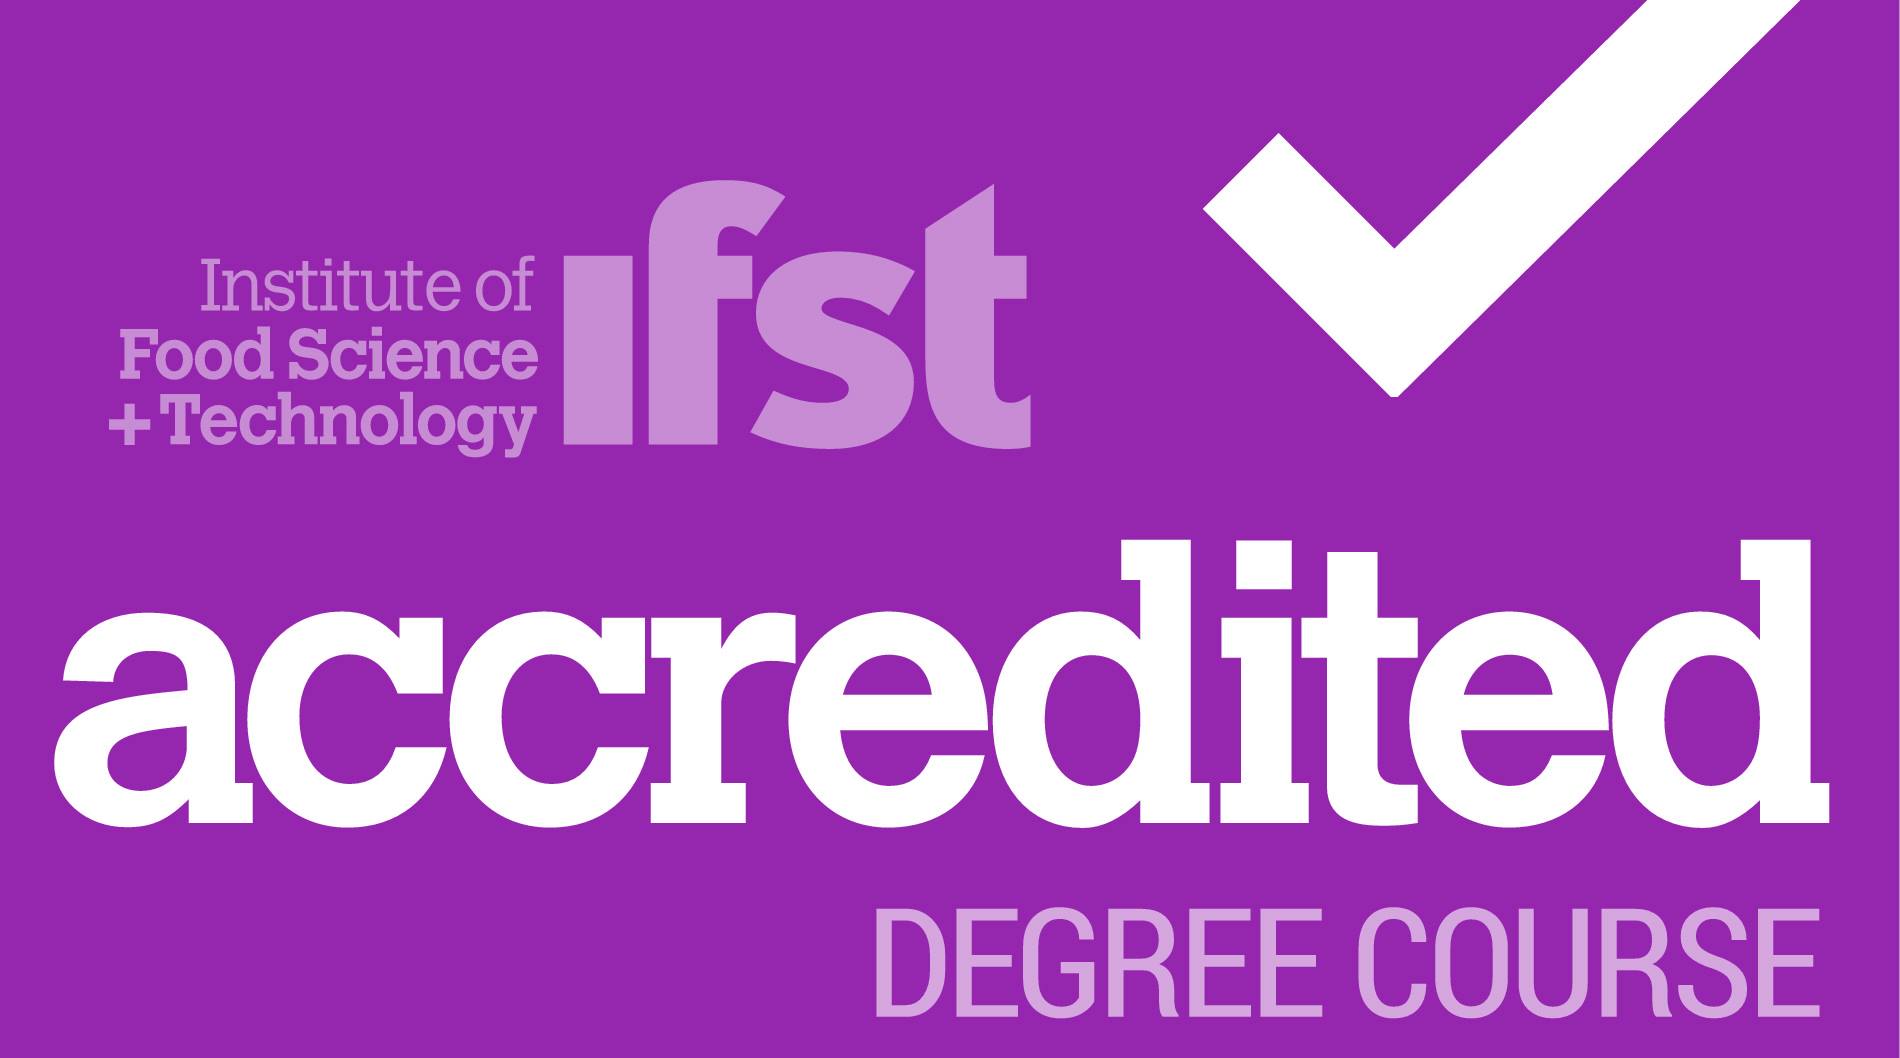 BSc Food Science, UCC, is IFST accredited